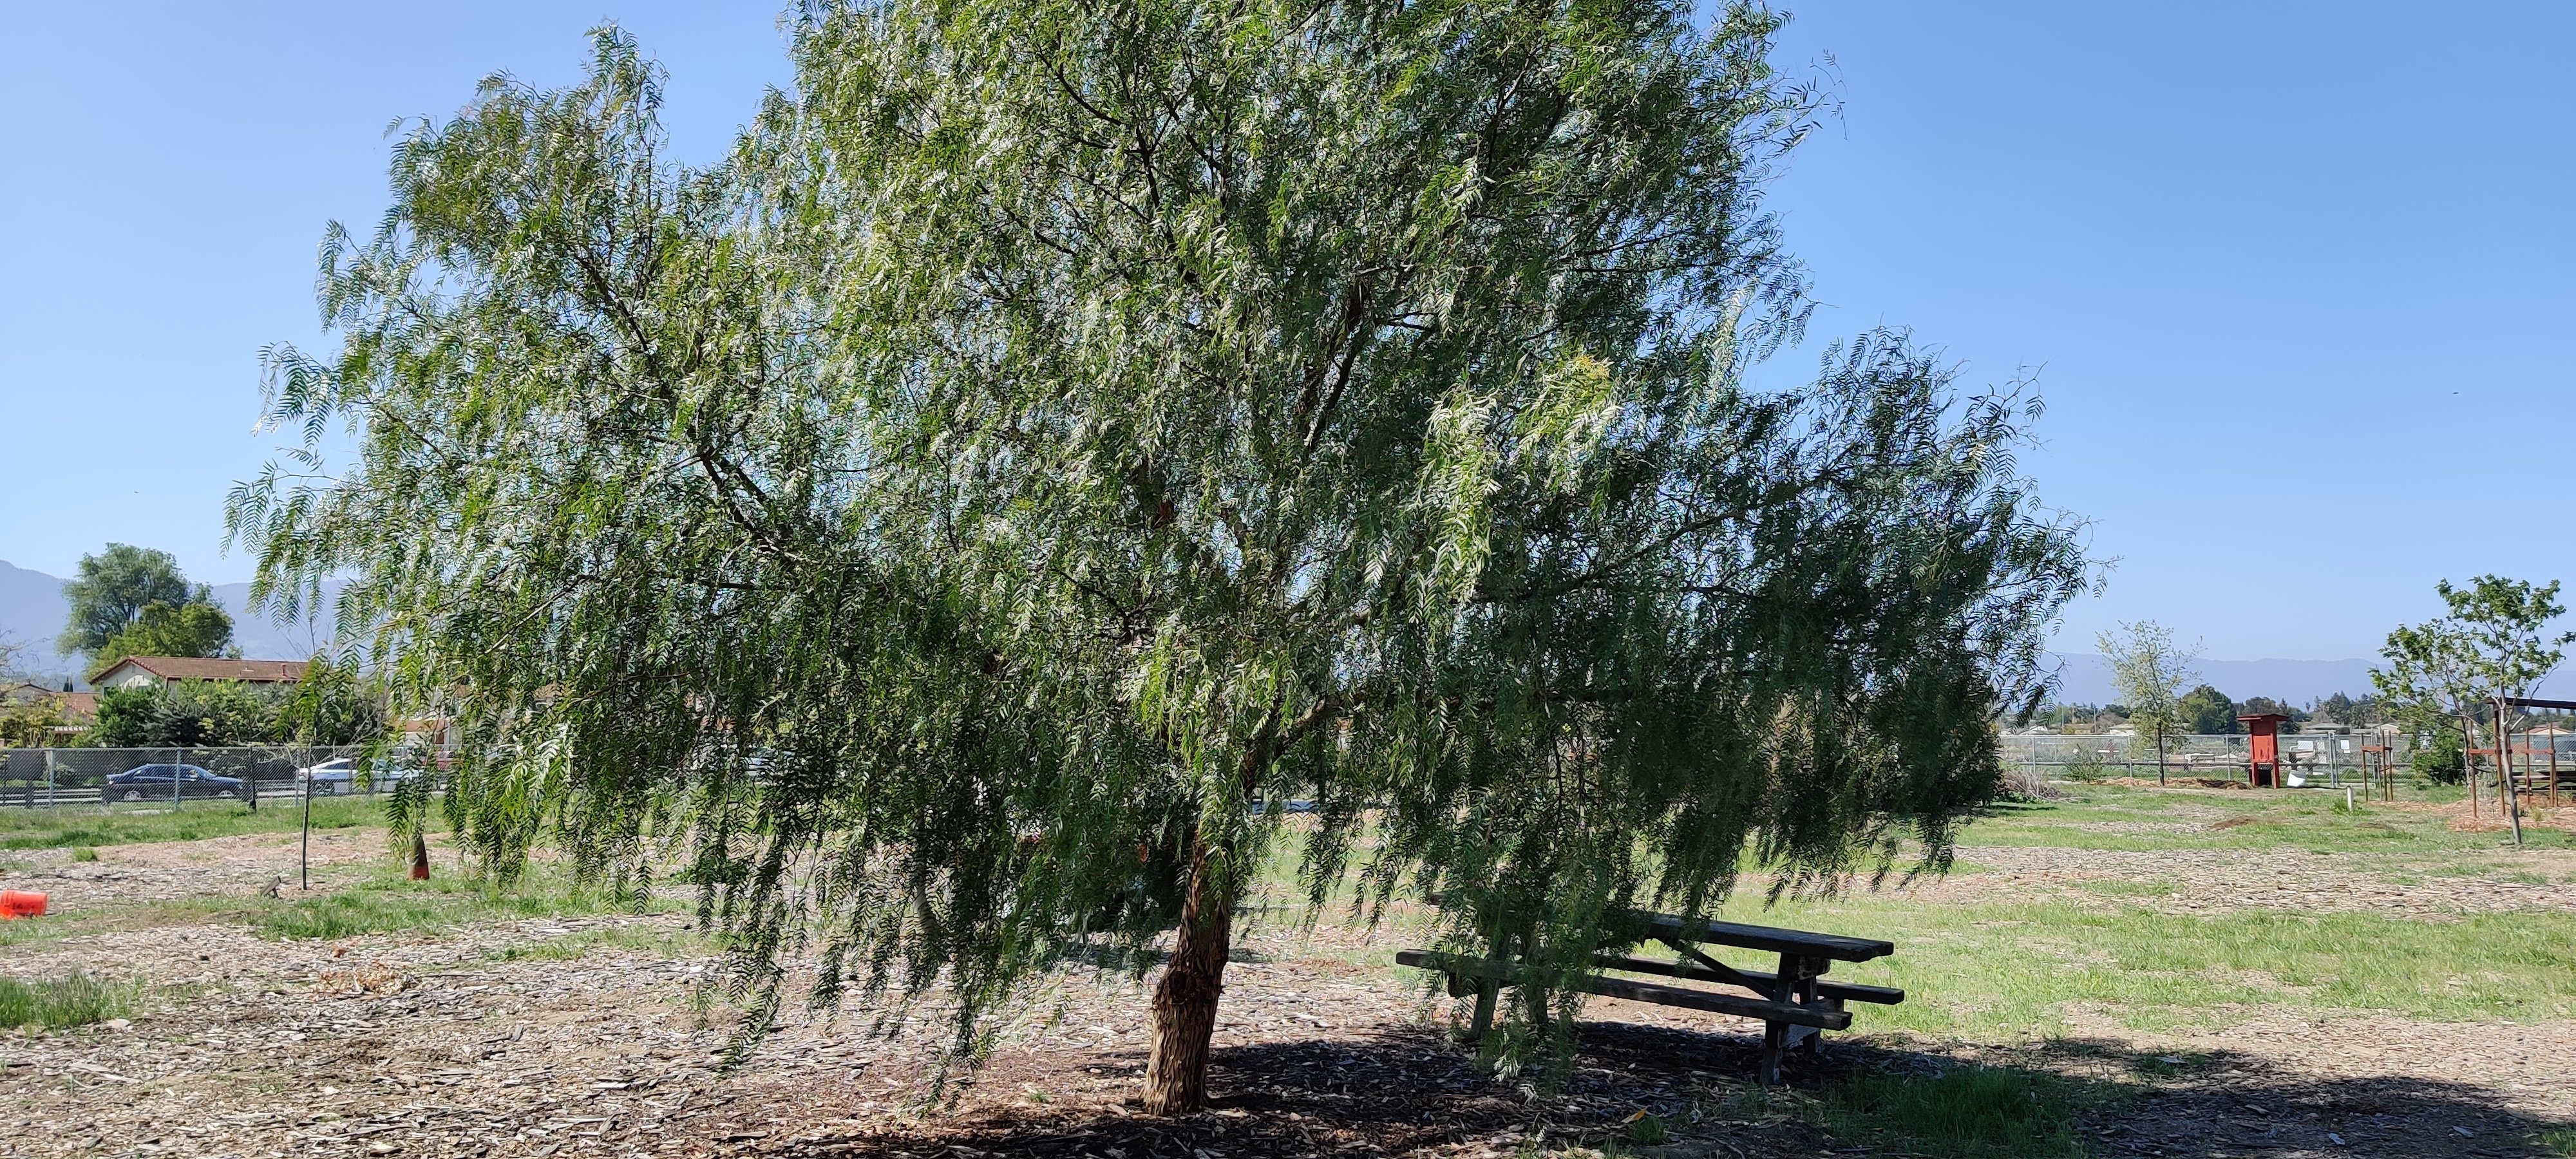 Large tree with picnic table in the shade